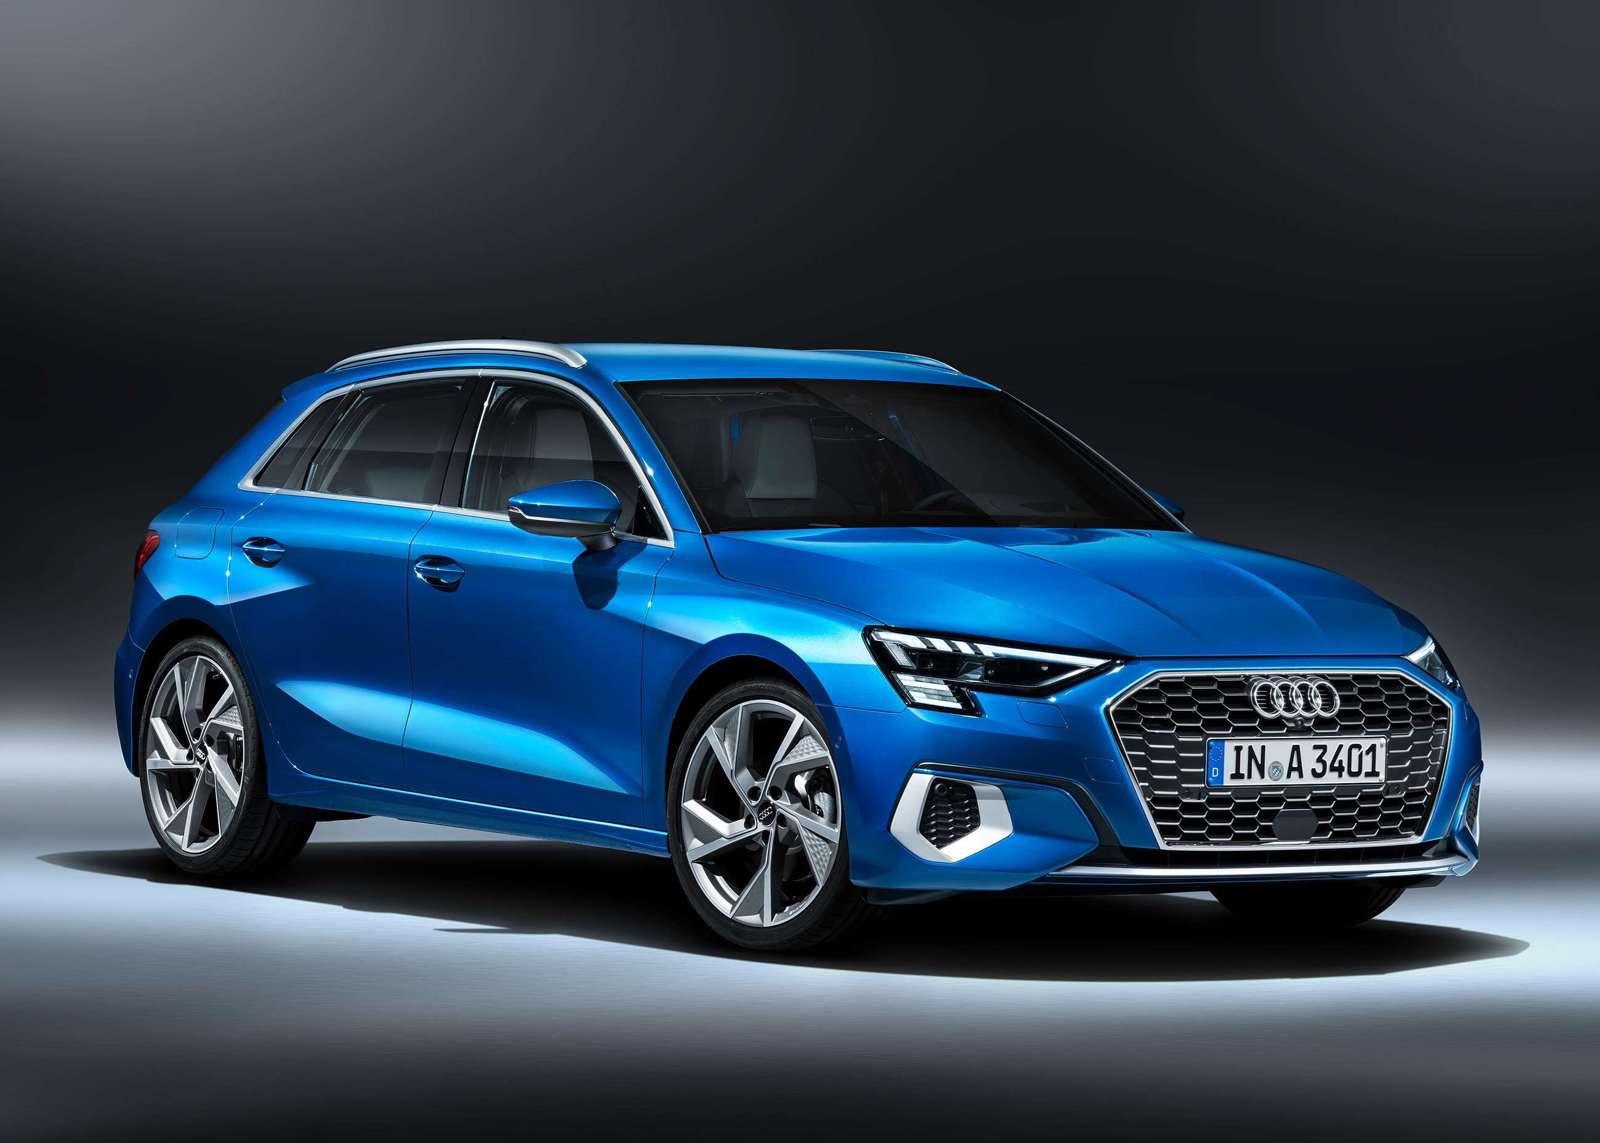 Audi S New A3 Is Just 425 More Than A New Volkswagen Golf Grr